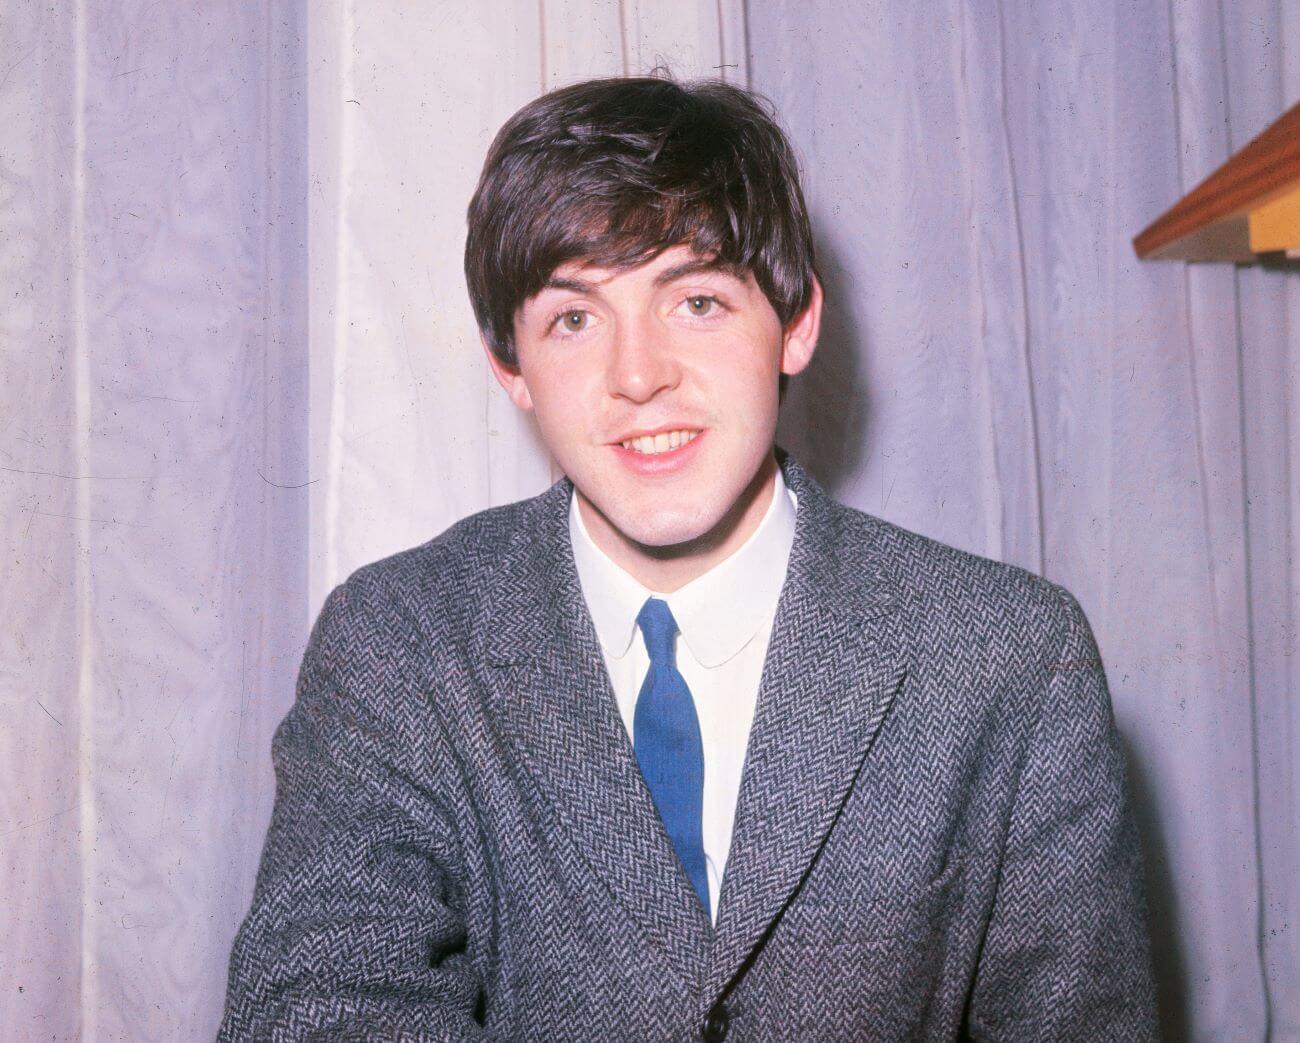 Paul McCartney wears a tweed jacket and a tie and sits in front of a purple curtain.